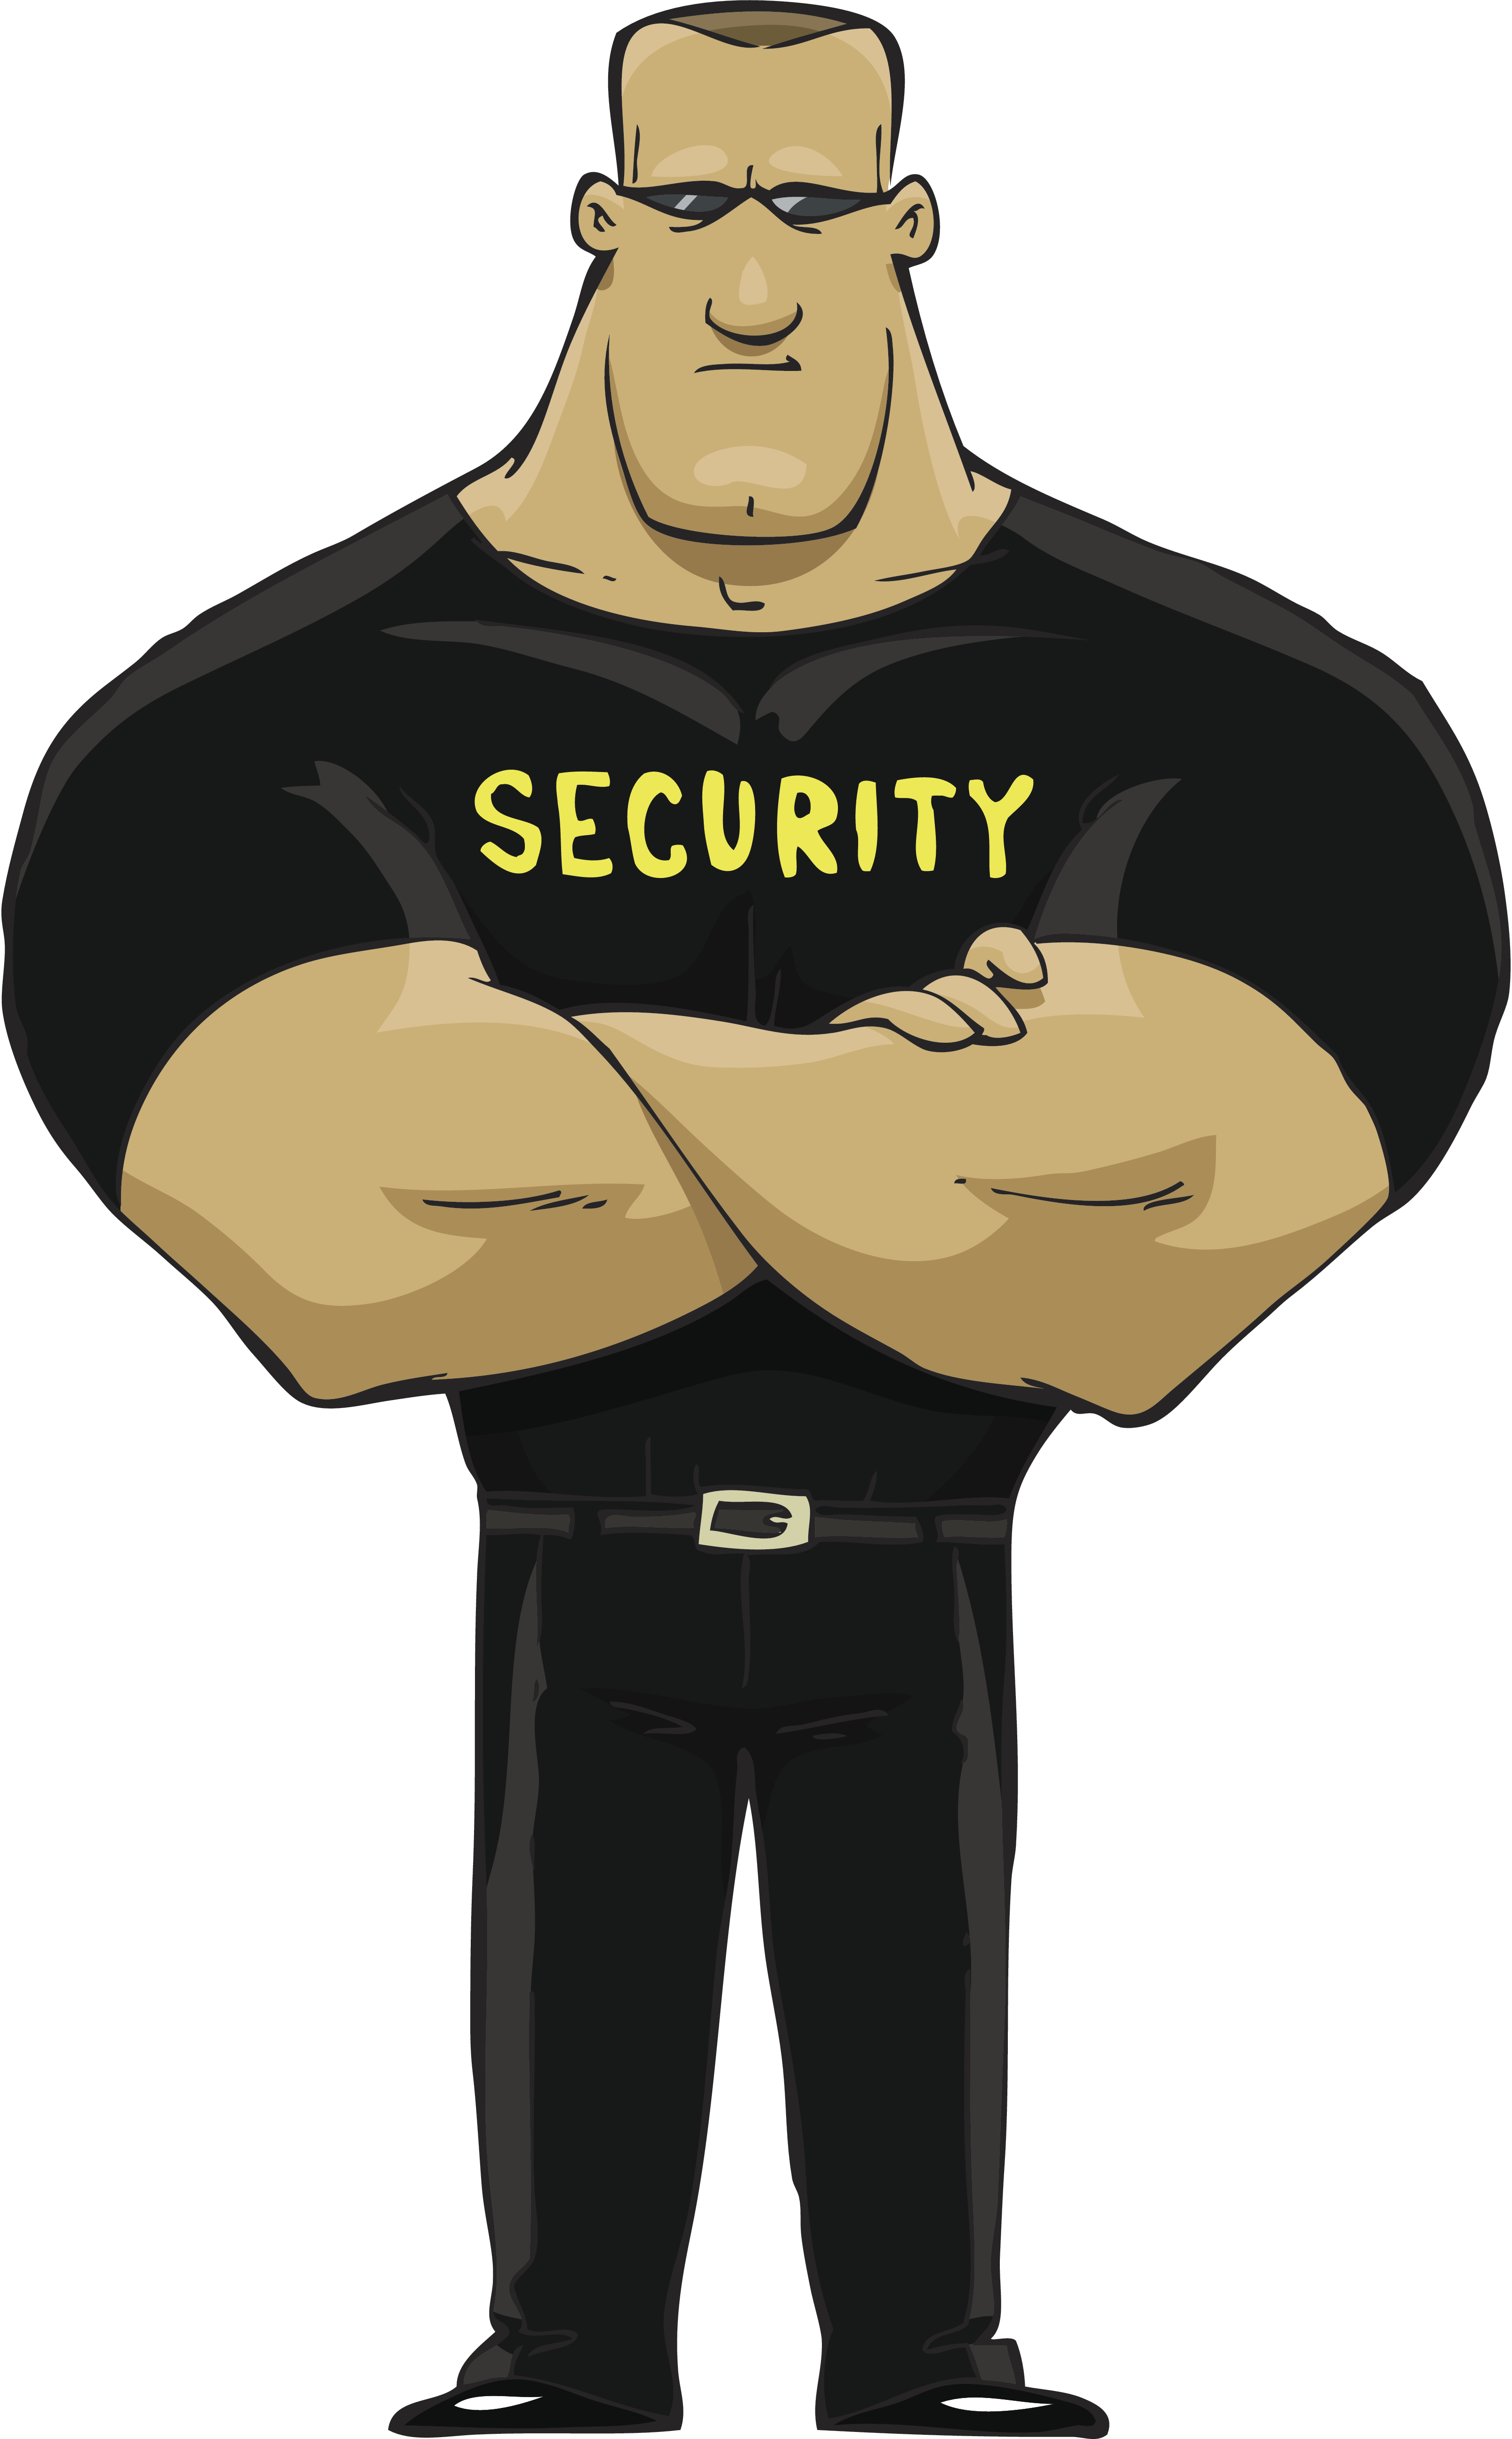 security guard clipart black and white - photo #39